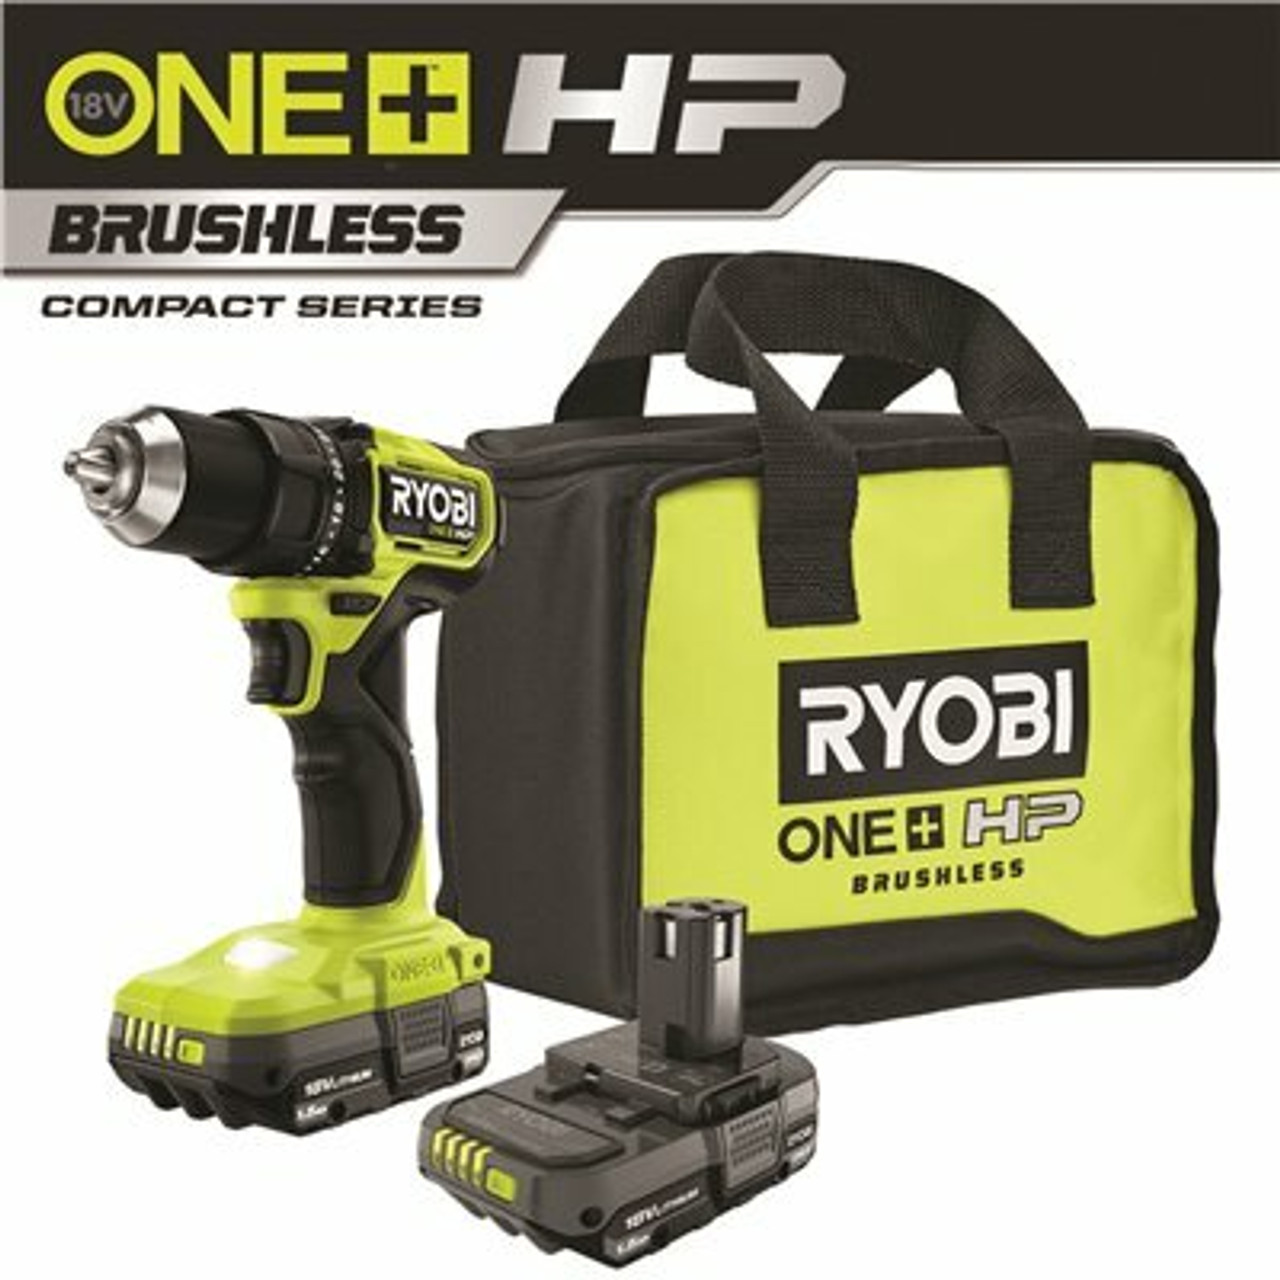 Ryobi One+ Hp 18V Brushless Cordless Compact 1/2 In. Drill/Driver Kit With (2) 1.5 Ah Batteries, Charger And Bag